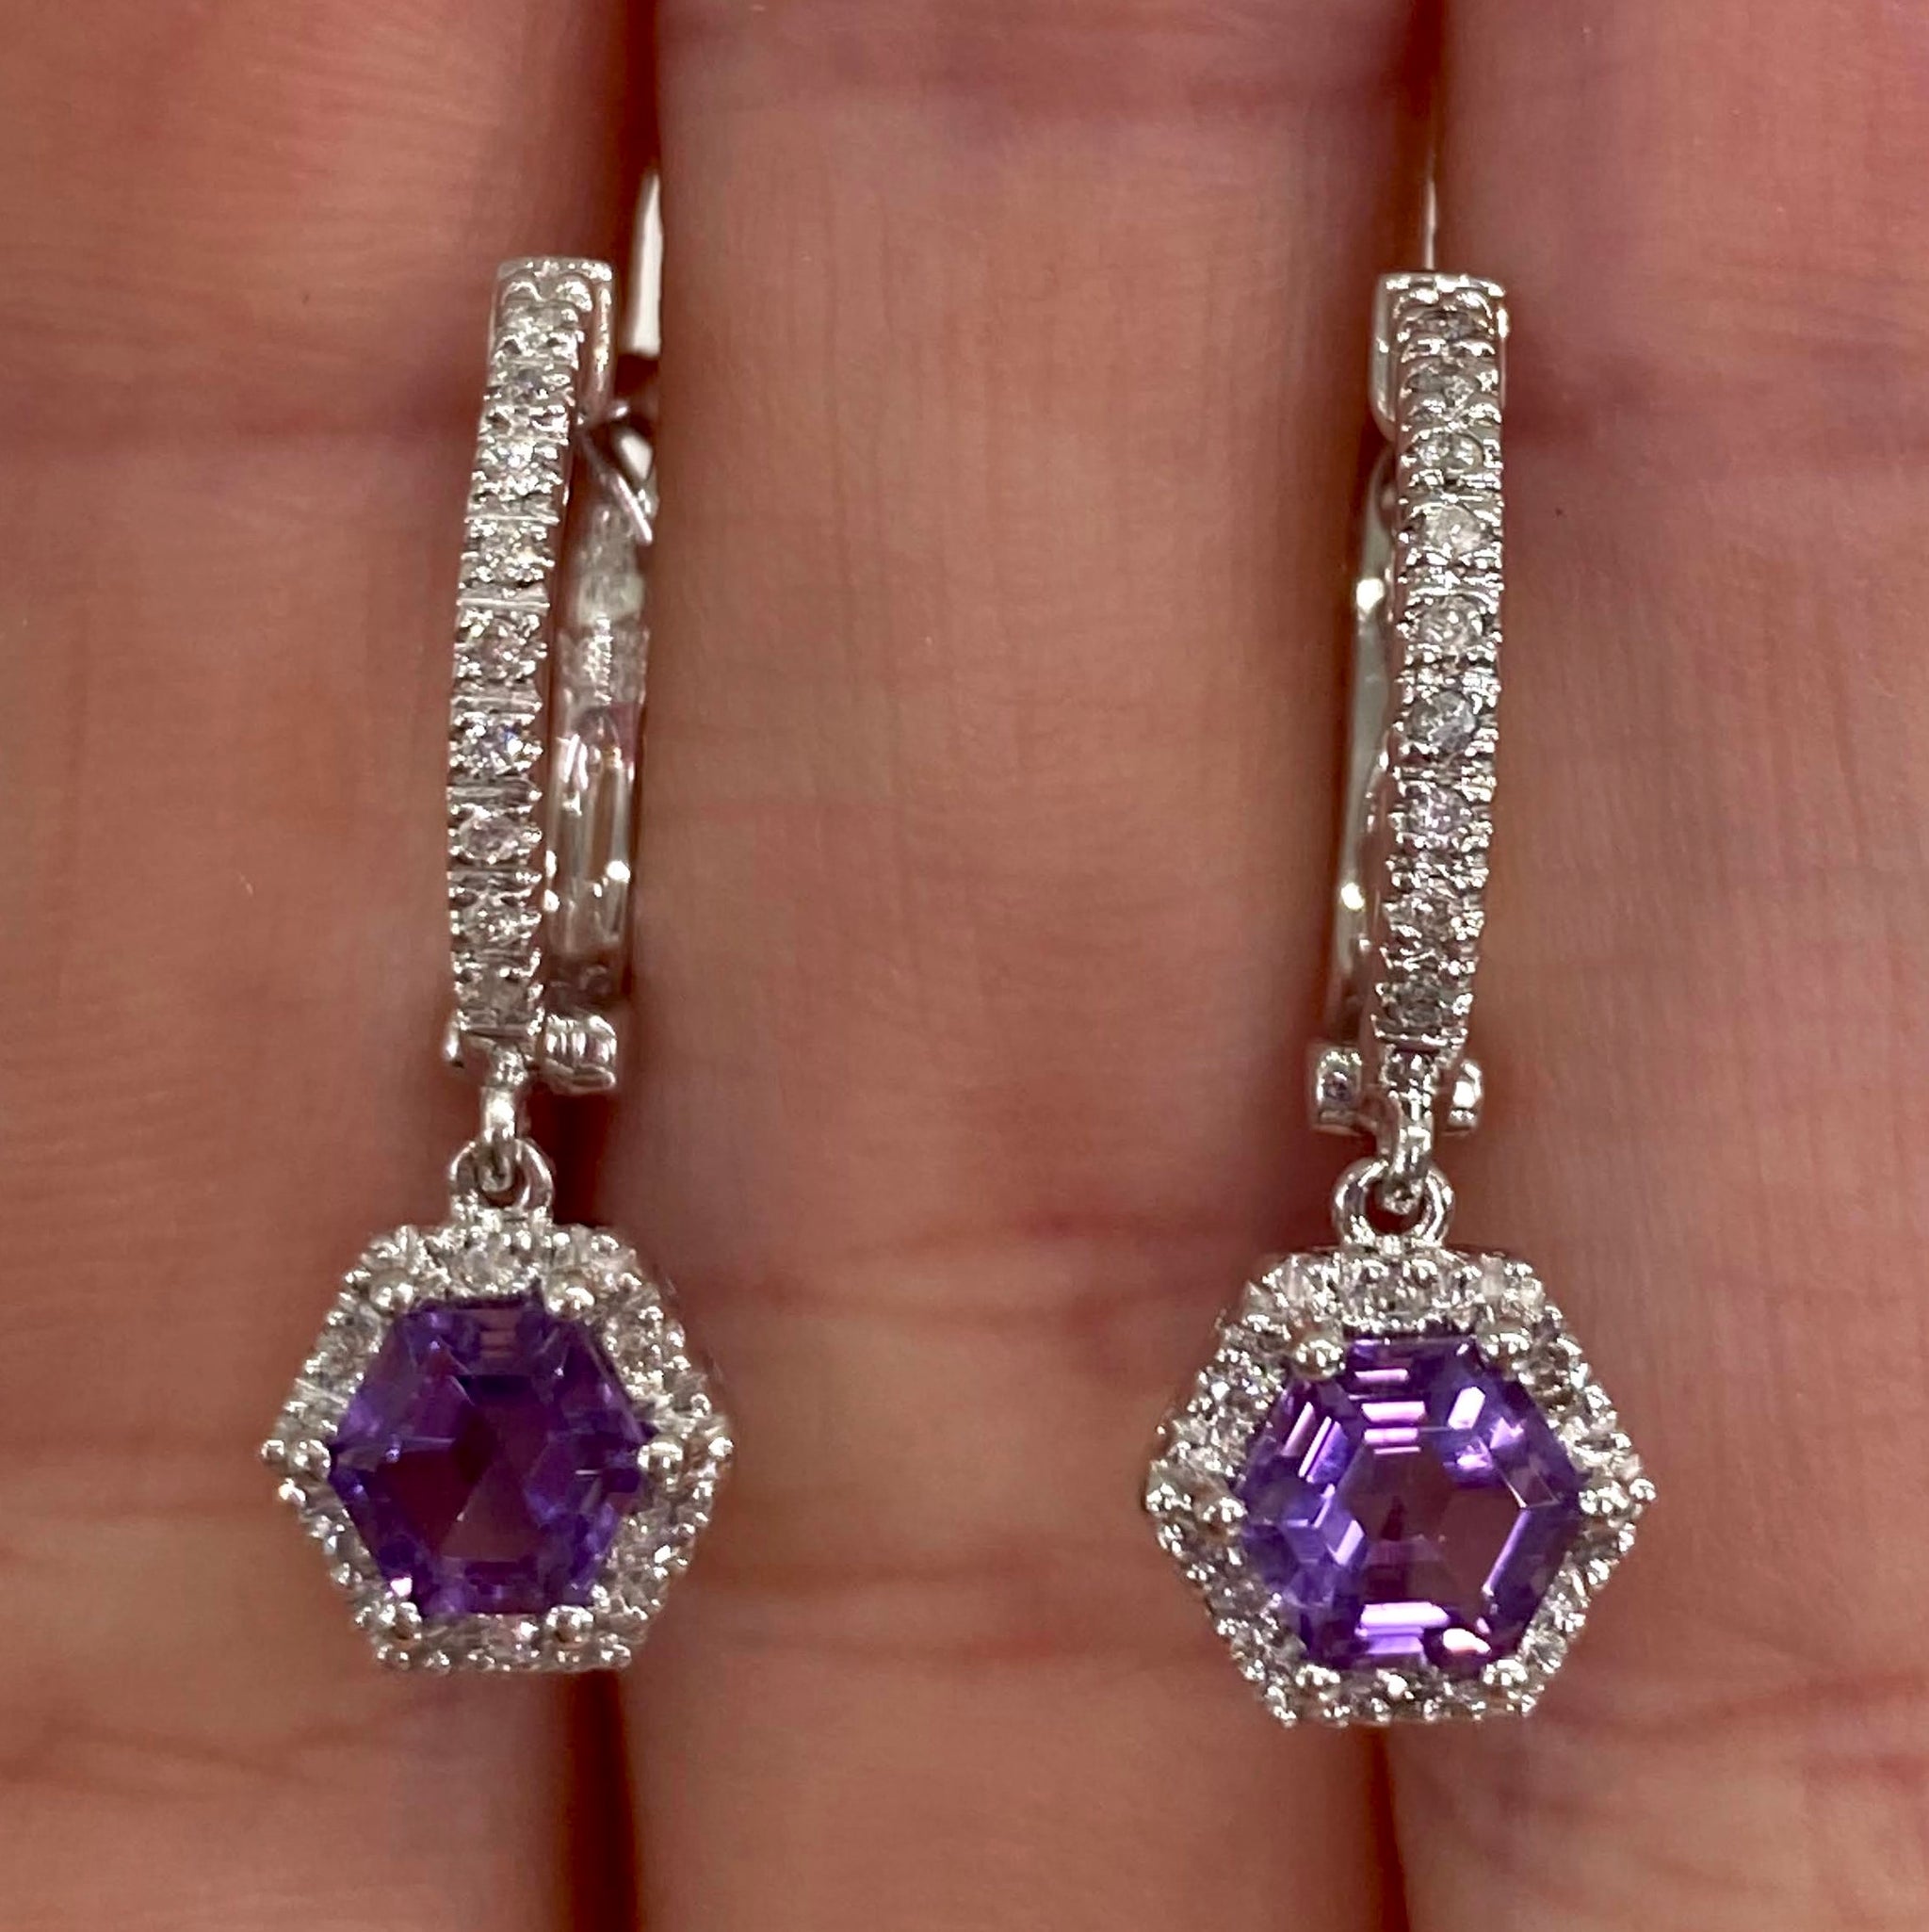 Rose-cut Diamond Hoops with Carved Amethyst Flower Drops – T H E L I N E